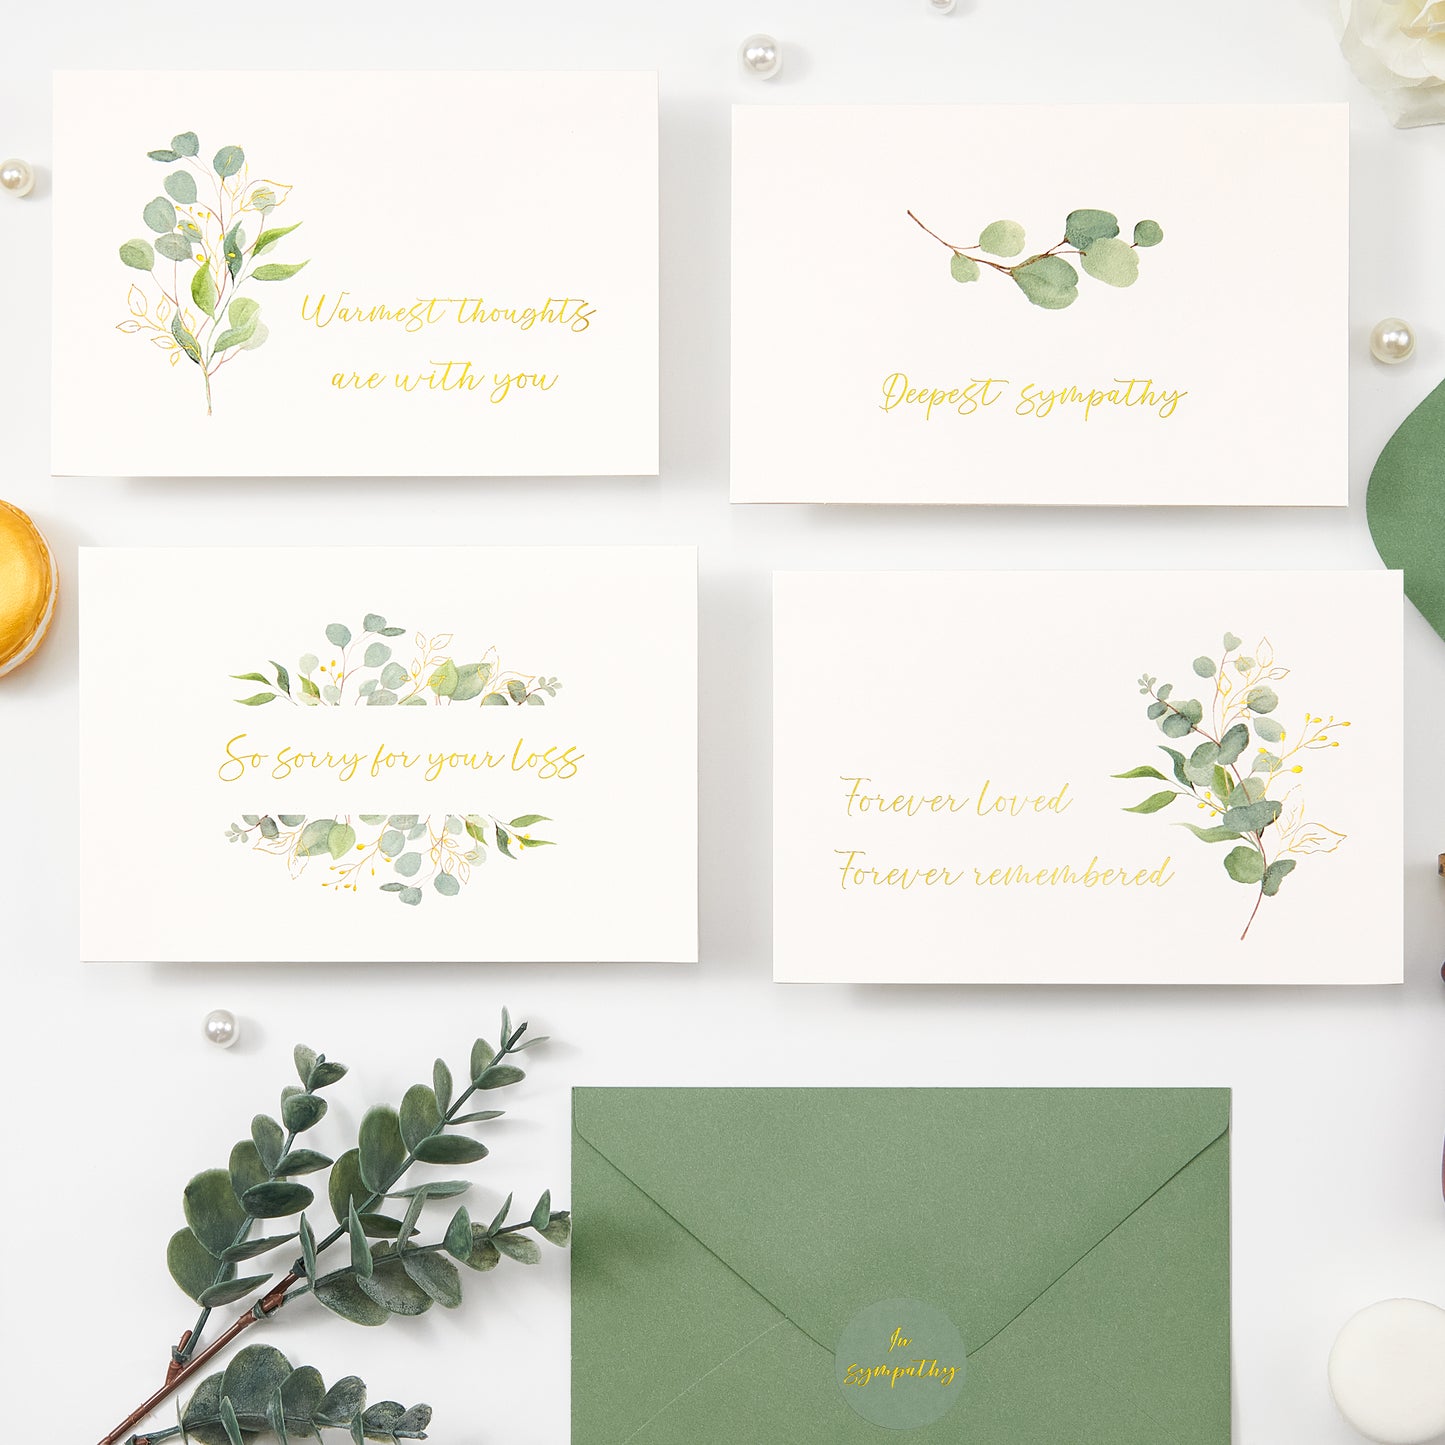 Crisky 25 Pack Greenery Gold Foil Sympathy Cards with Envelopes Boxed 4 Assortment Condolence/Bereavement Cards